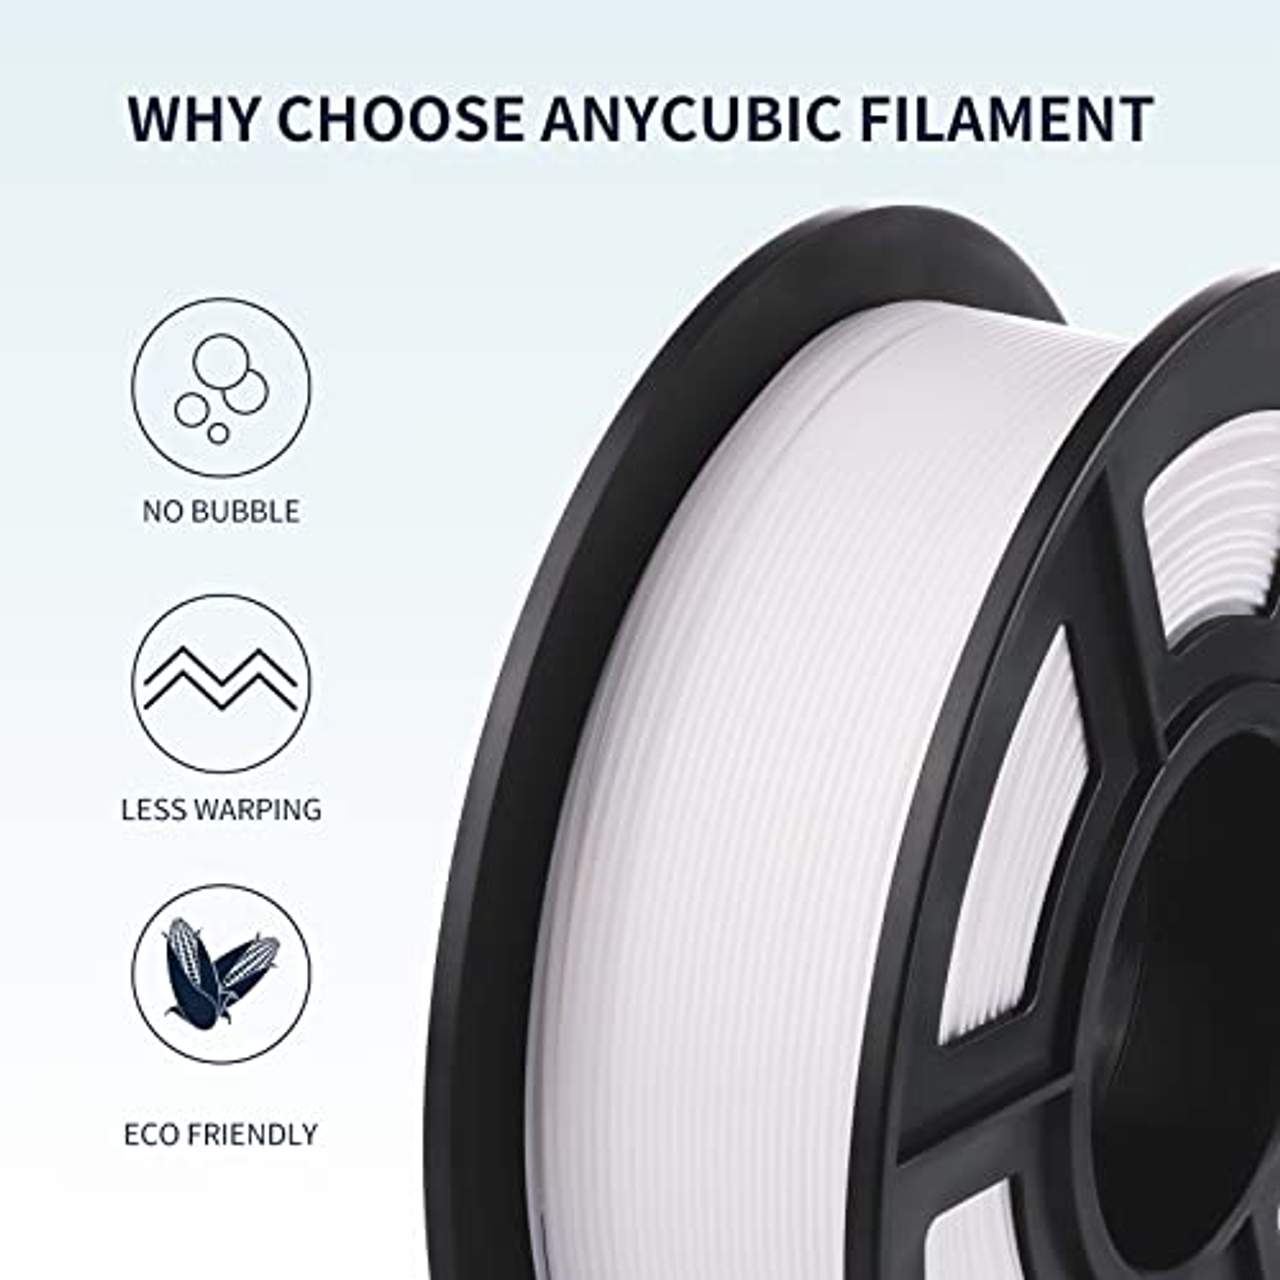 ANYCUBIC PLA Filament 1.75mm